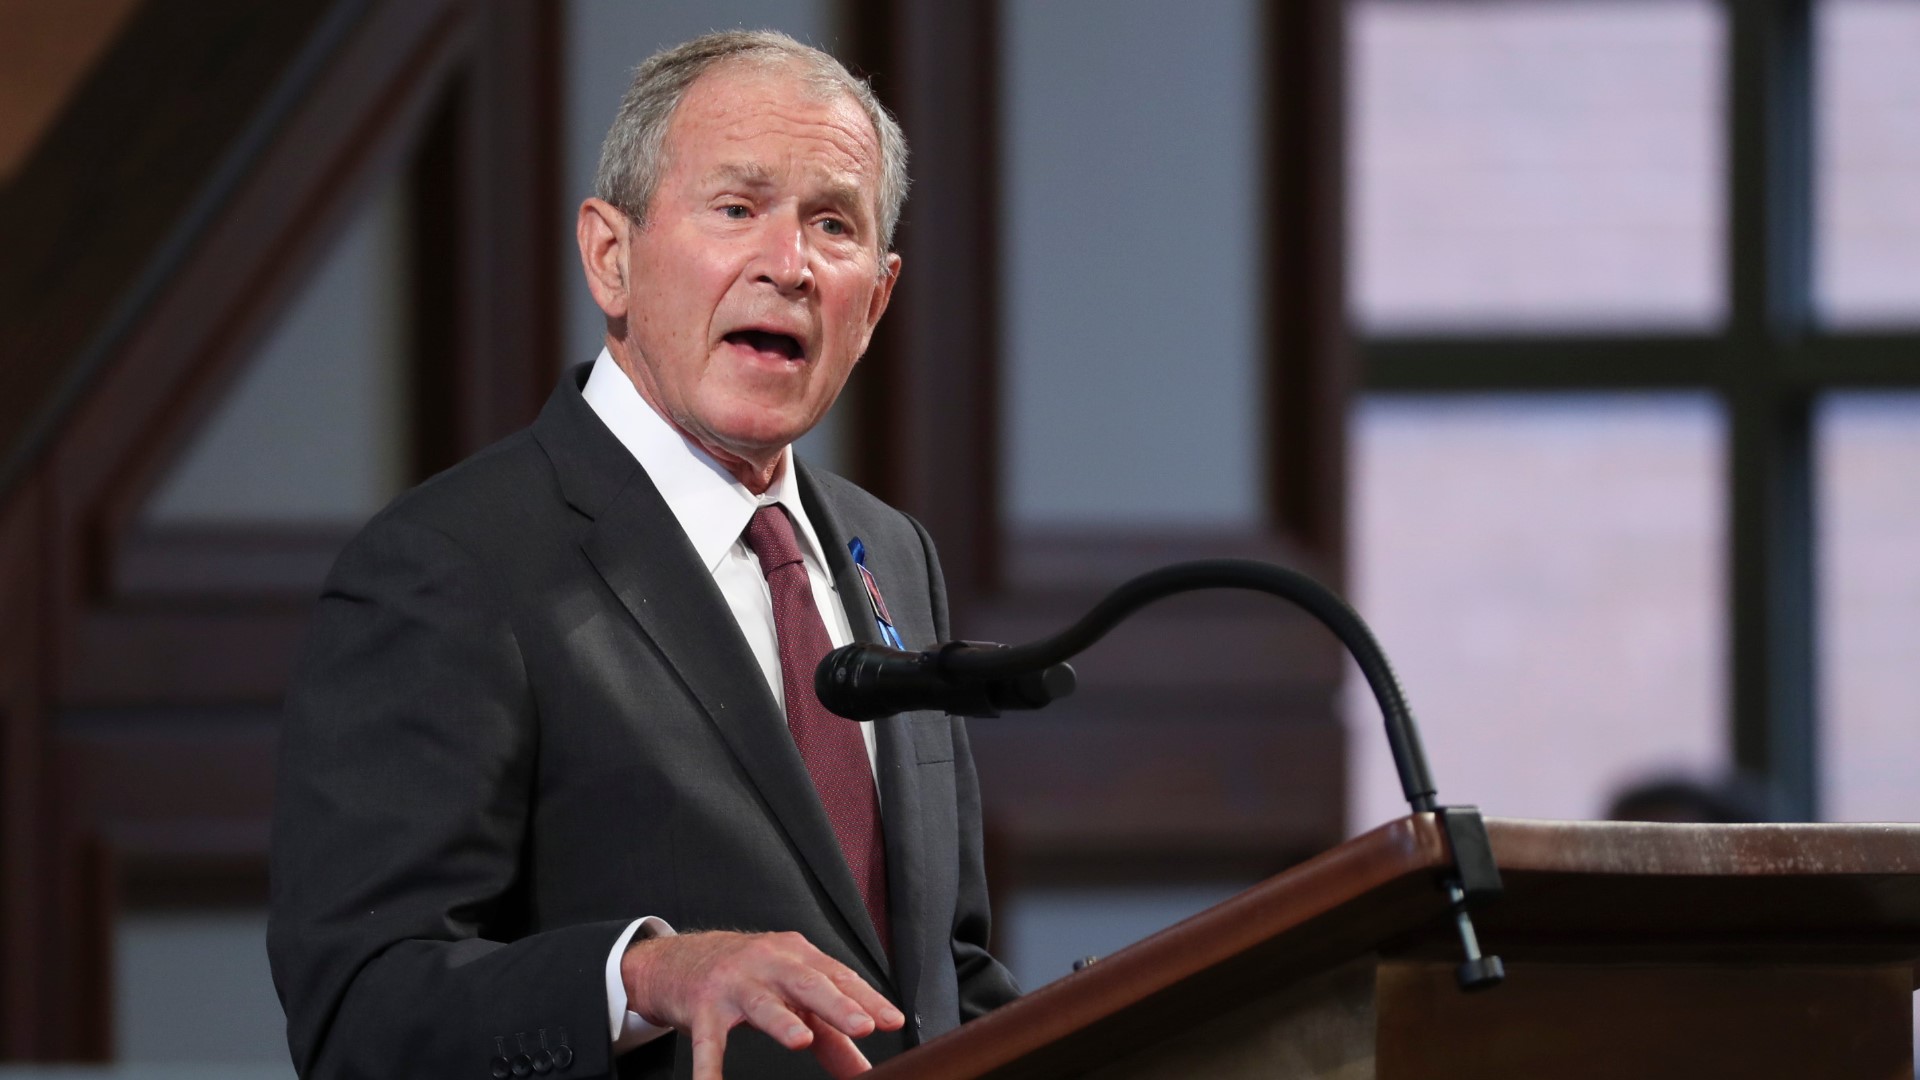 Bush said he will never forget joining him in Selma, Alabama for the 50th Anniversary of the march across the Edmund Pettus Bridge.